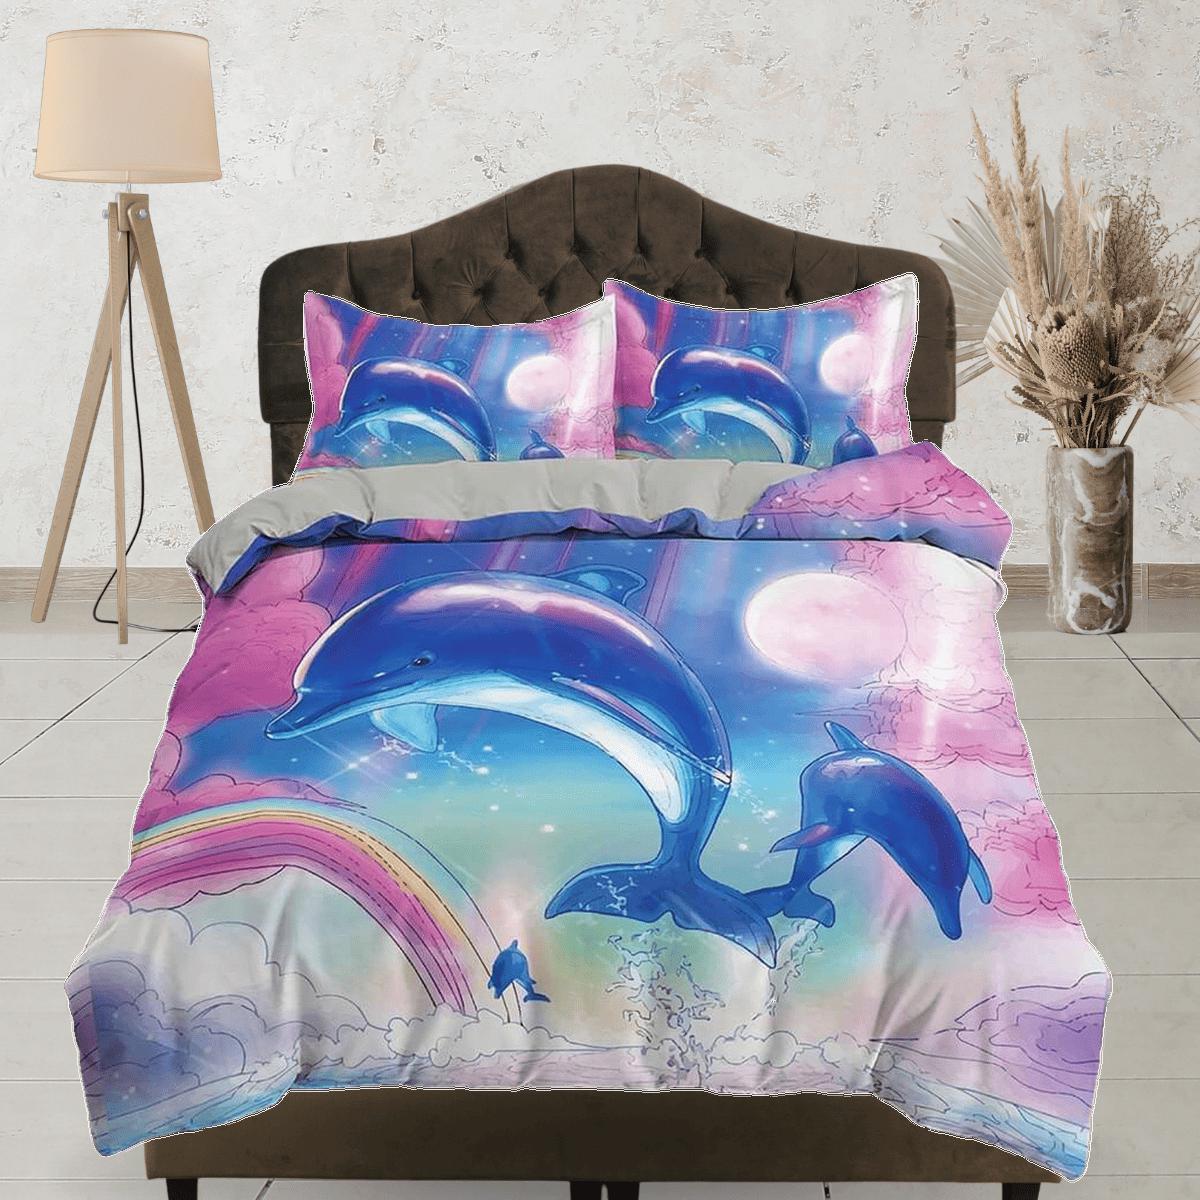 daintyduvet Cute dolphin bedding colorful duvet cover, ocean blush decor, pink and blue bedding set full king queen twin, college dorm bedding gift